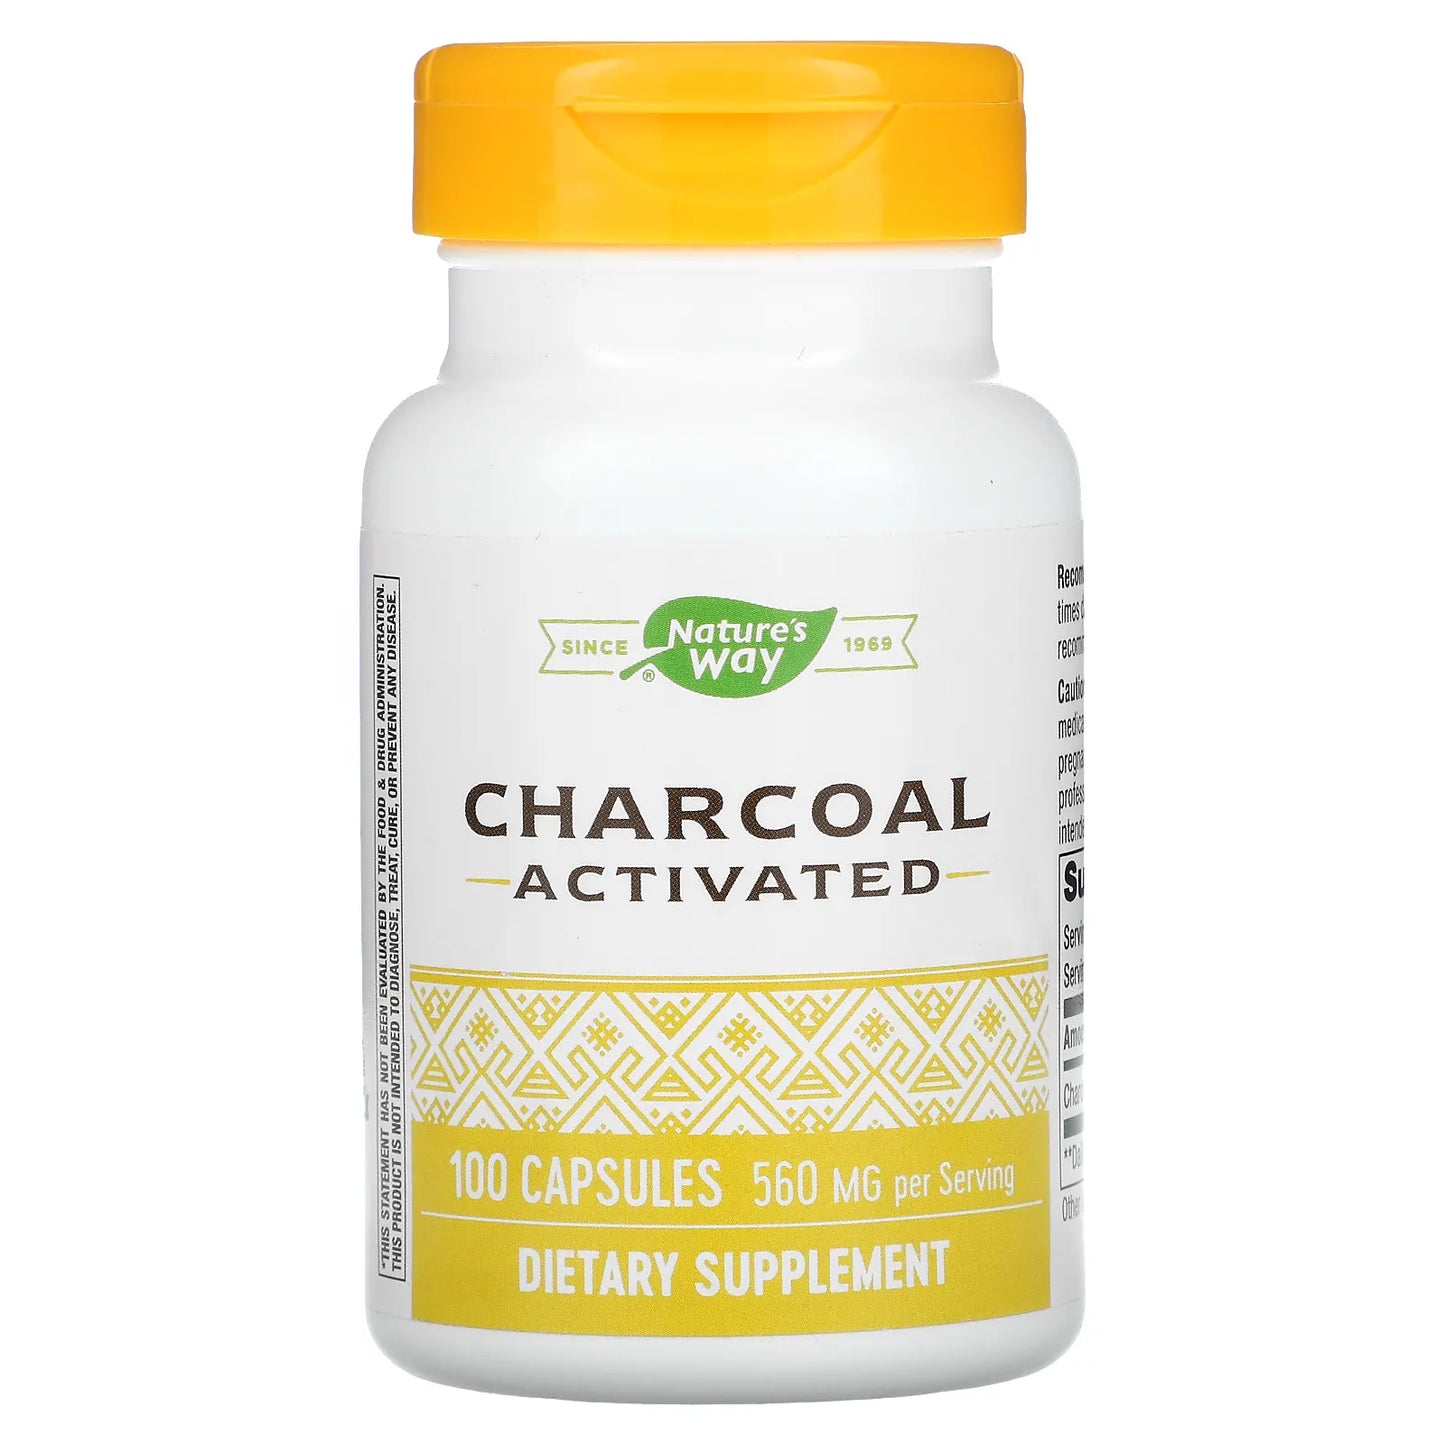 NATURE’S WAY CHARCOAL ACTIVATED, 100 CAPSULES